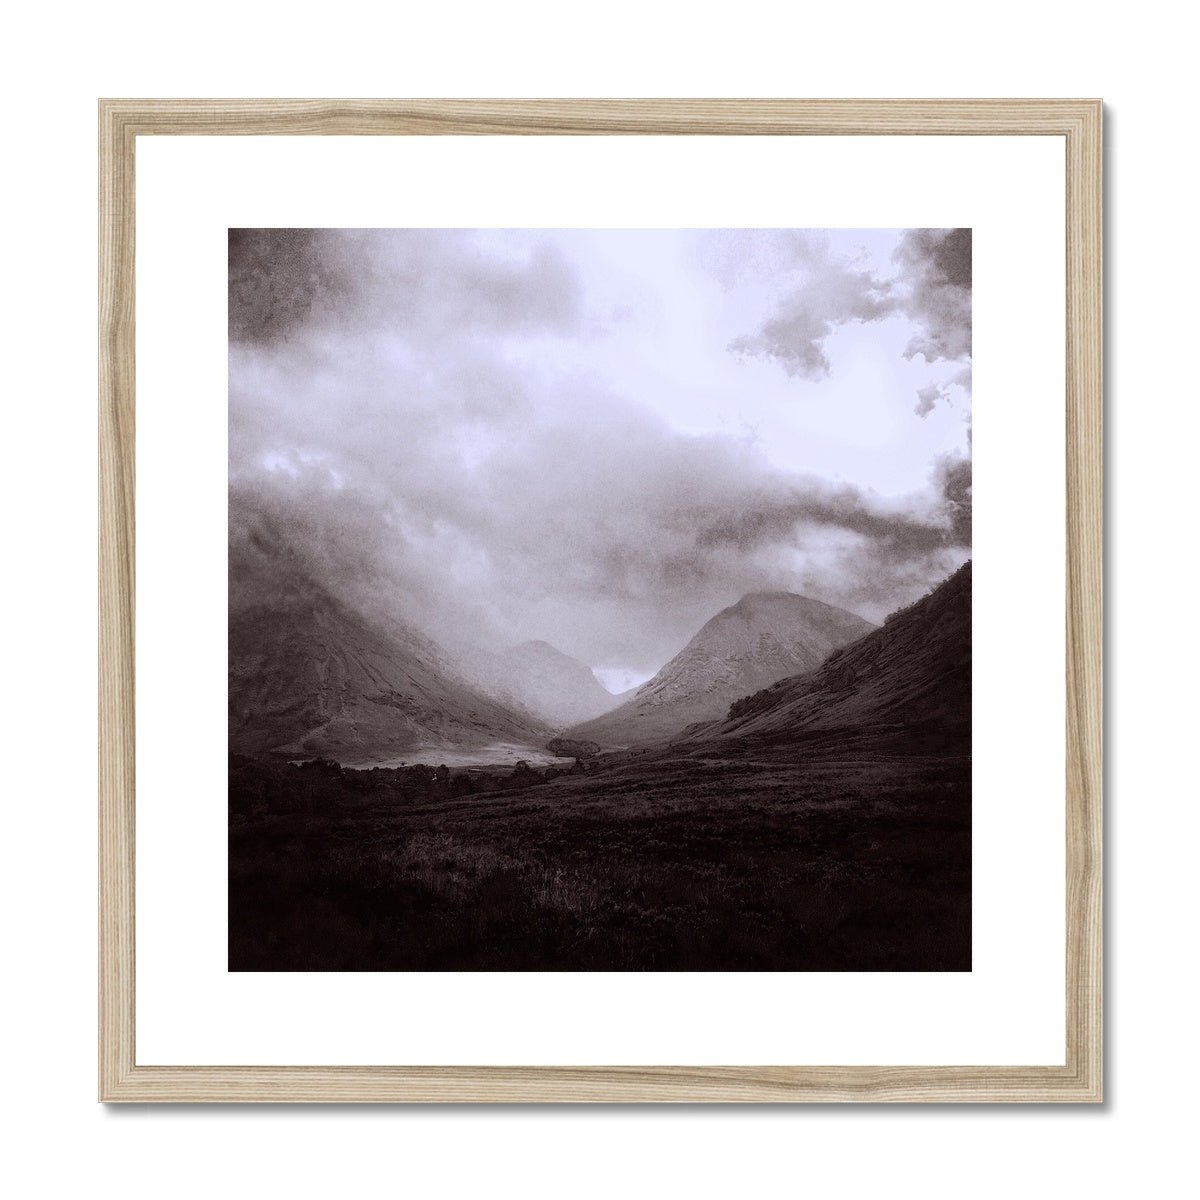 Glencoe Mist Painting | Framed & Mounted Prints From Scotland-Framed & Mounted Prints-Glencoe Art Gallery-20"x20"-Natural Frame-Paintings, Prints, Homeware, Art Gifts From Scotland By Scottish Artist Kevin Hunter